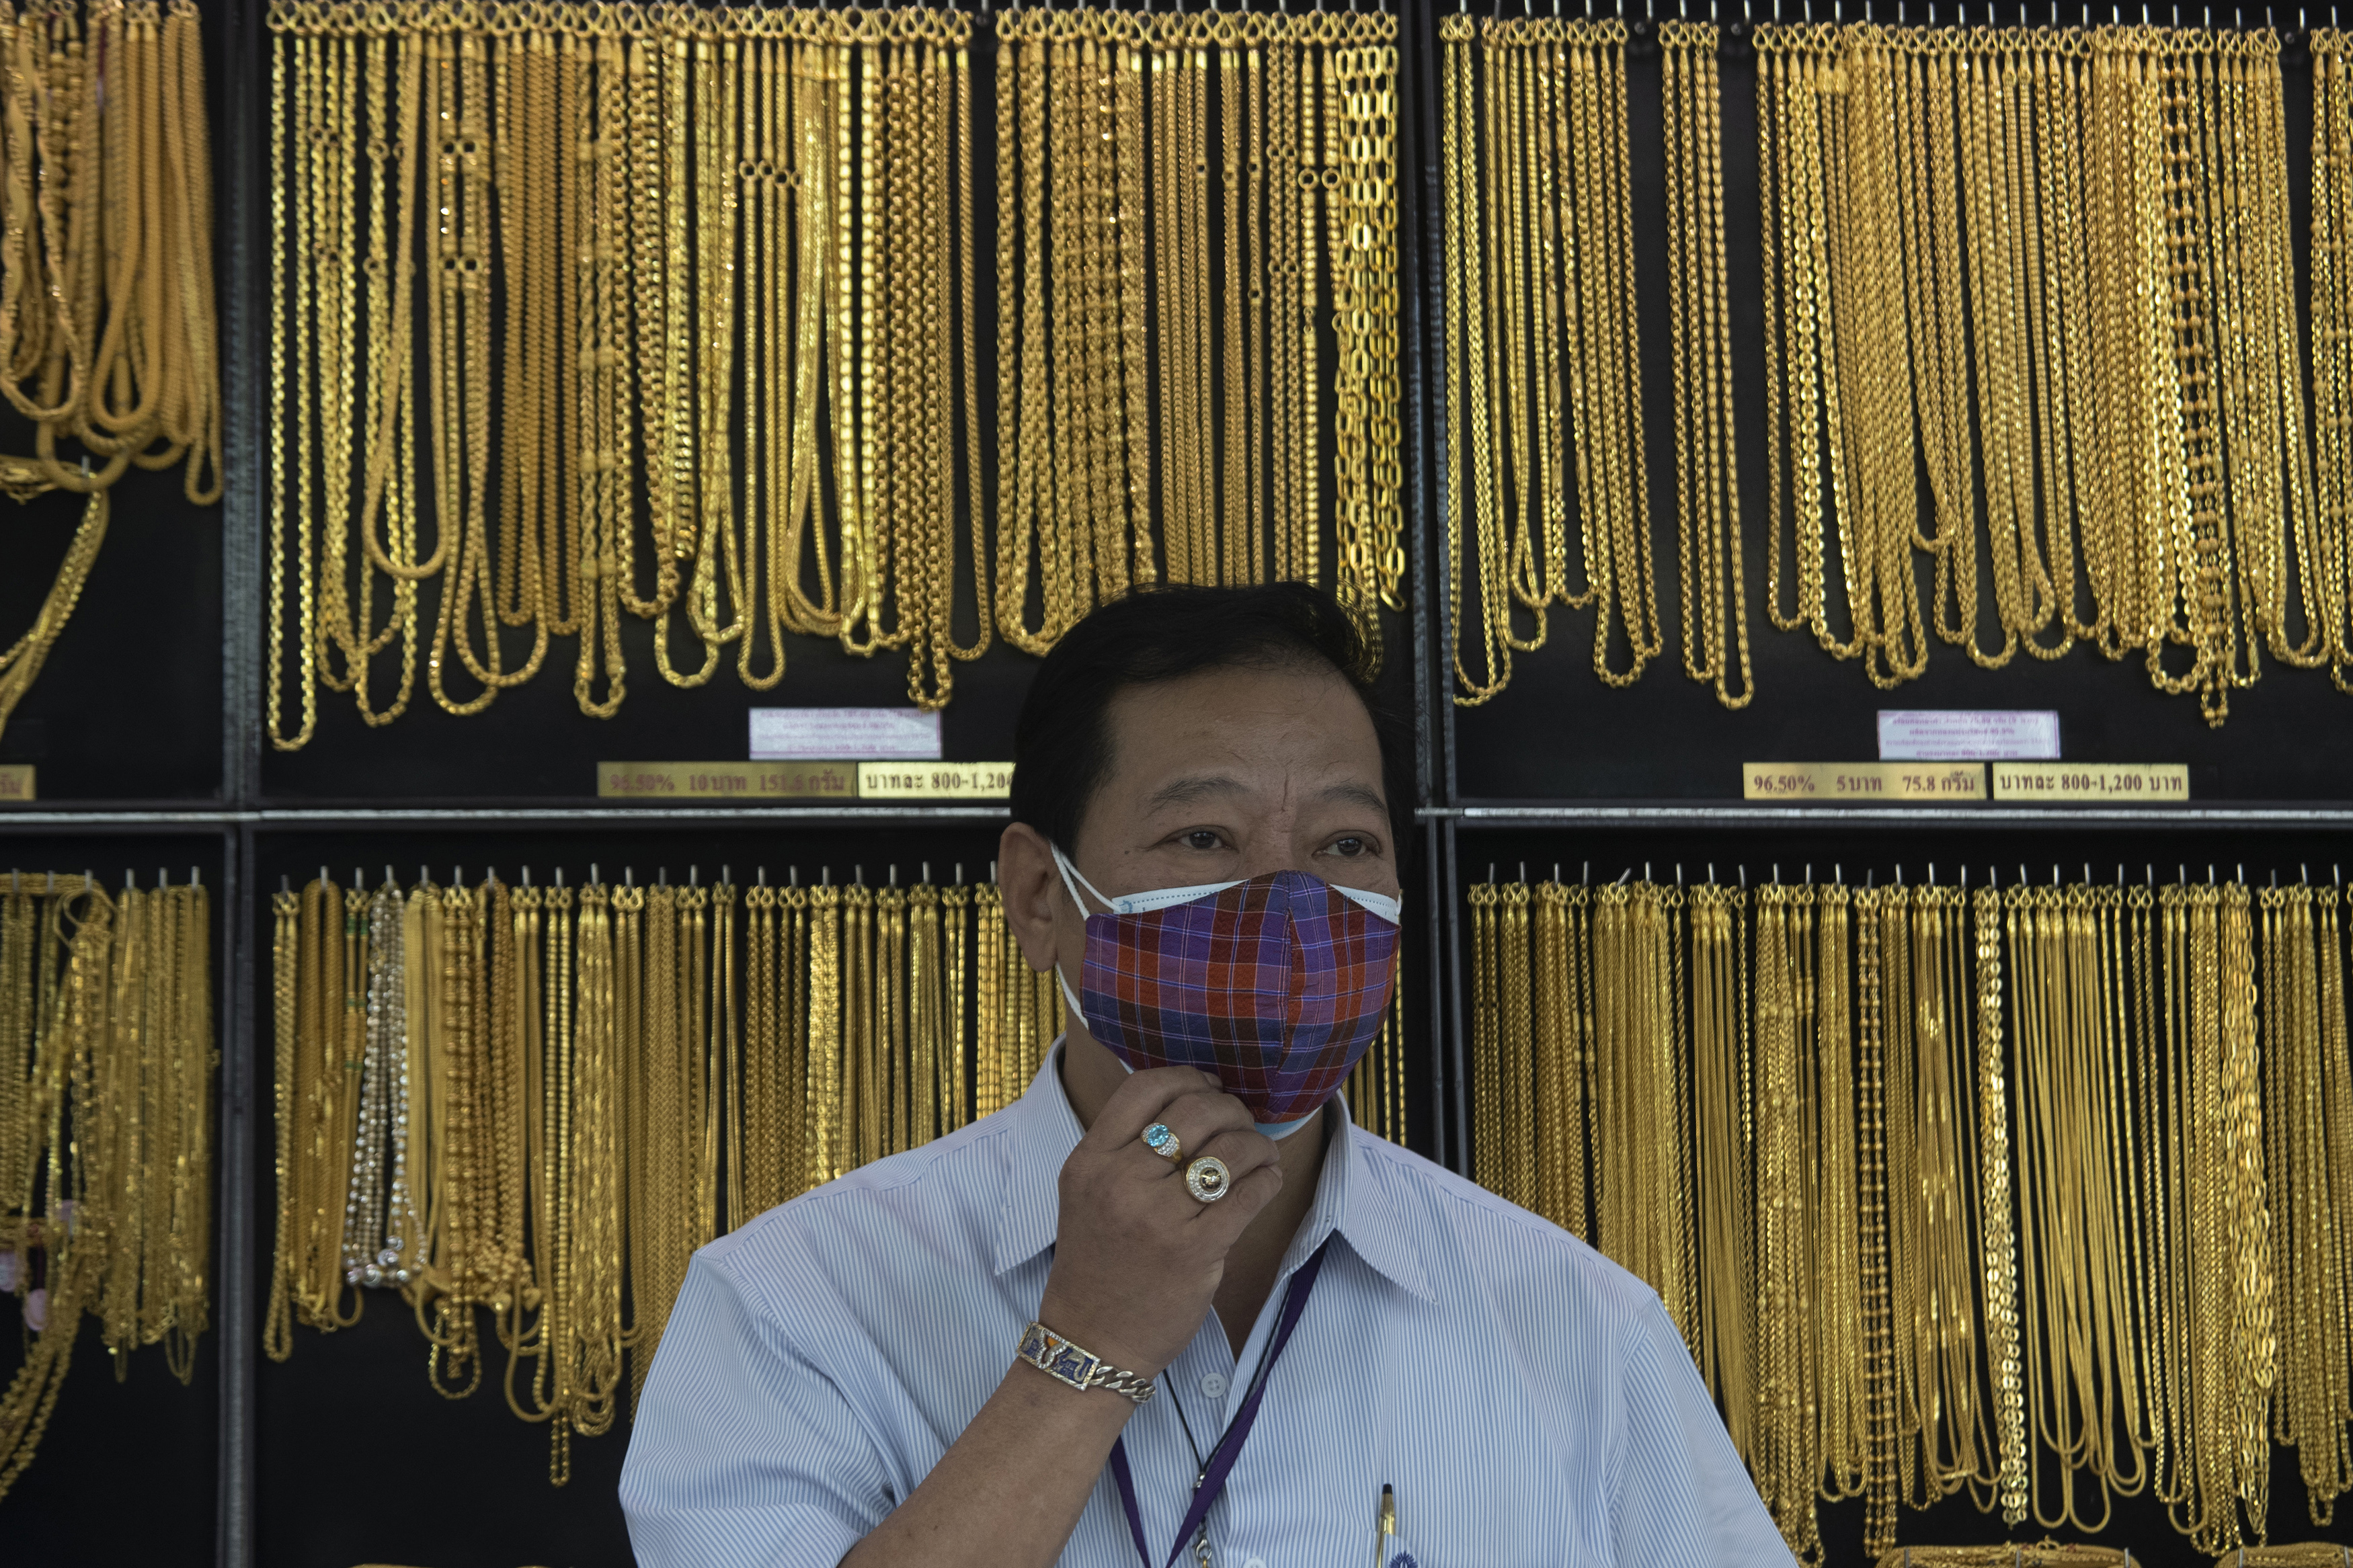 FILE - In this April 16, 2020, file photo, a Thai shopkeeper adjusts his face mask at a gold shop in Bangkok, Thailand. The price of gold surged more than $30 on Monday, July 27, 2020 to over $1,926 per ounce as investors step up buying of the precious metal often sought in times of uncertainty. Gold was trading at $1,926.20 by early afternoon in Asia, up 1.5%, after surging over the weekend. Photo: AP